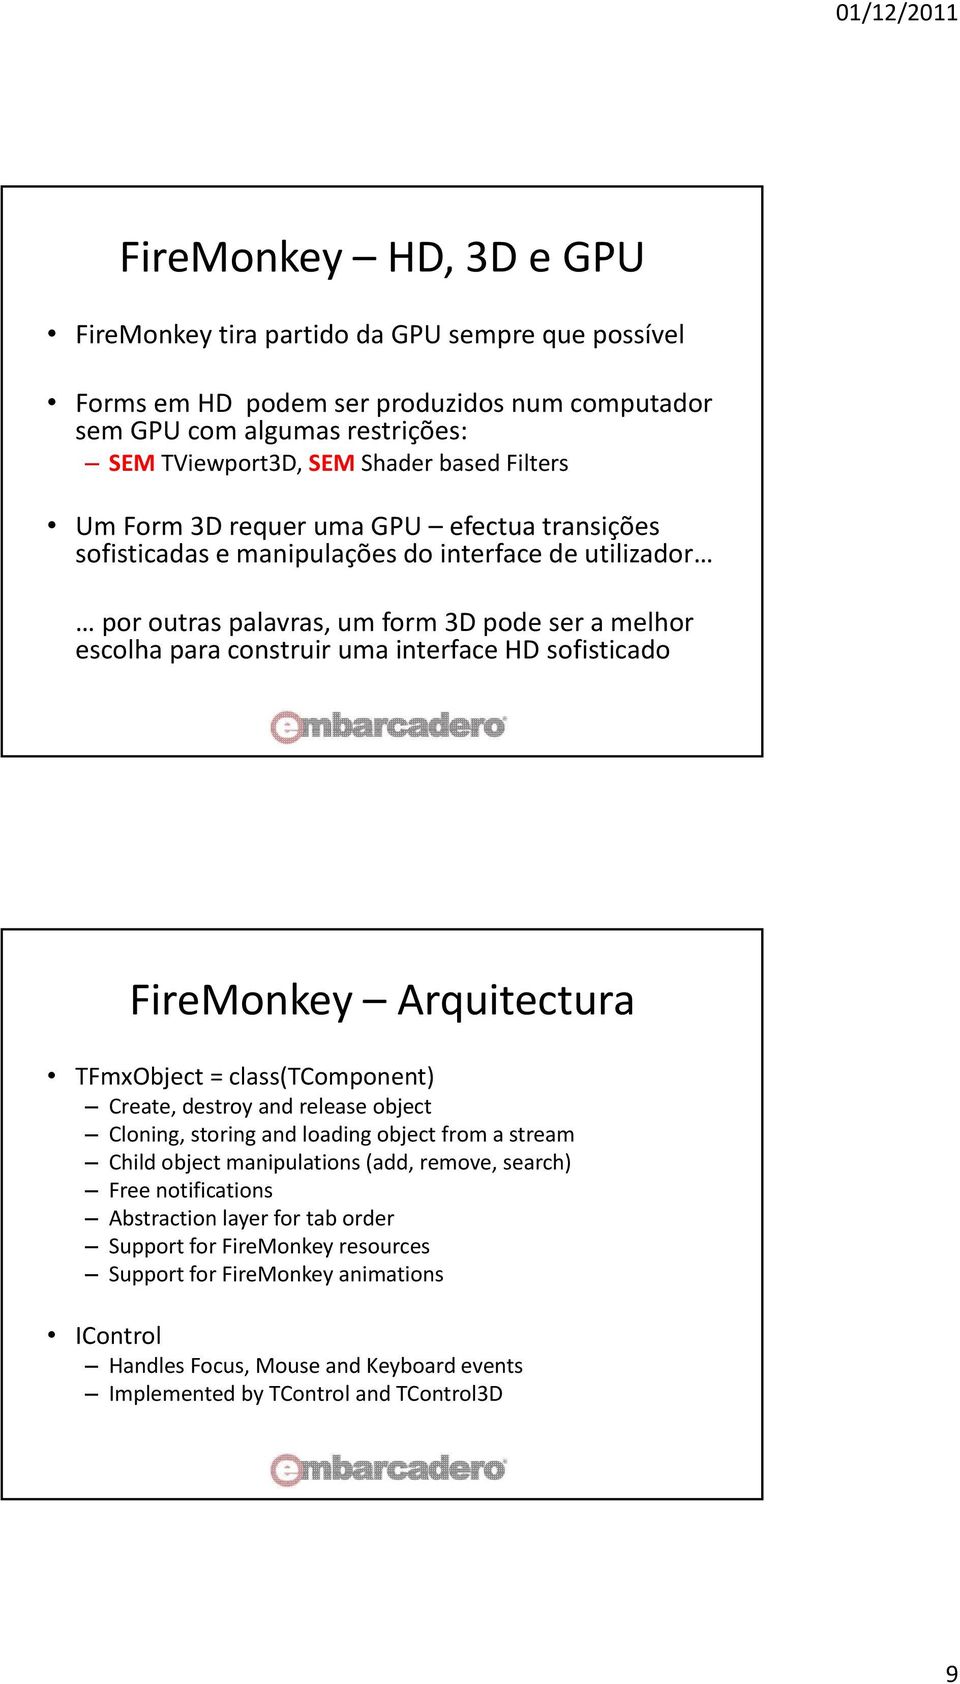 sofisticado FireMonkey Arquitectura TFmxObject = class(tcomponent) Create, destroy and release object Cloning, storing and loading object from a stream Child object manipulations (add, remove,